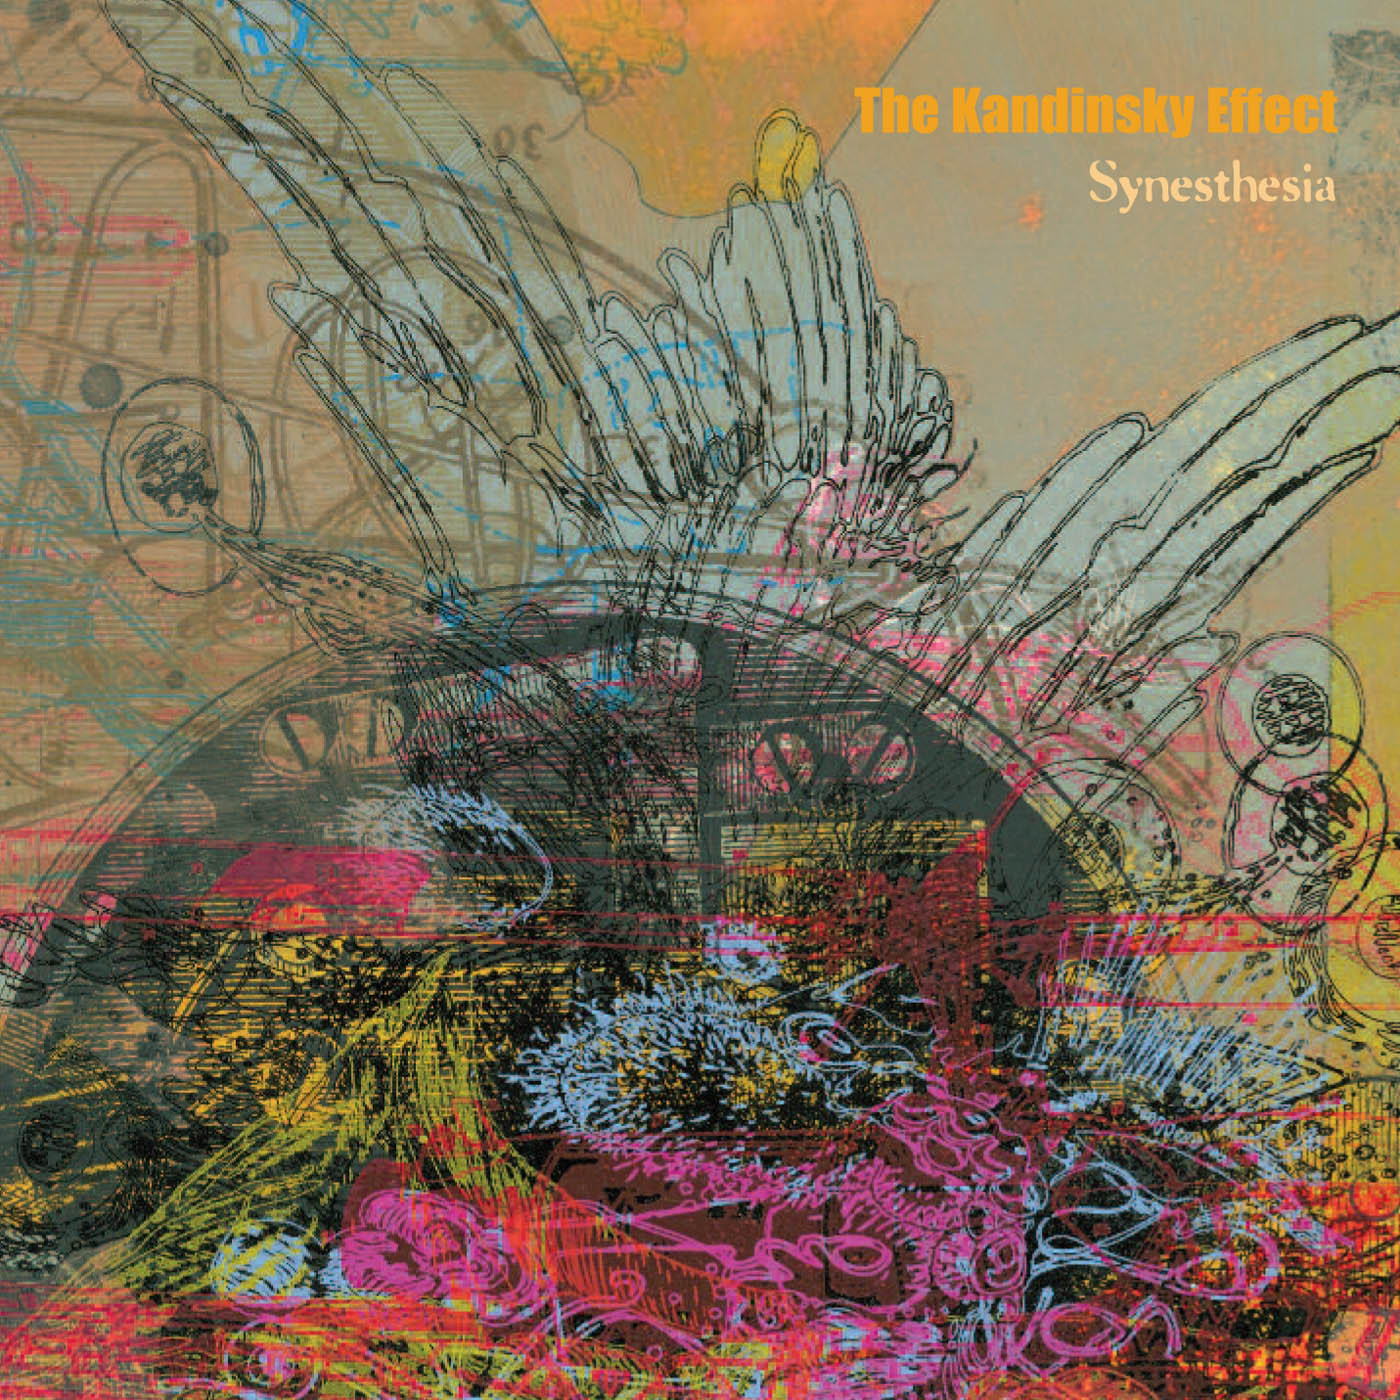 'Synesthesia' by The Kandinsky Effect Review